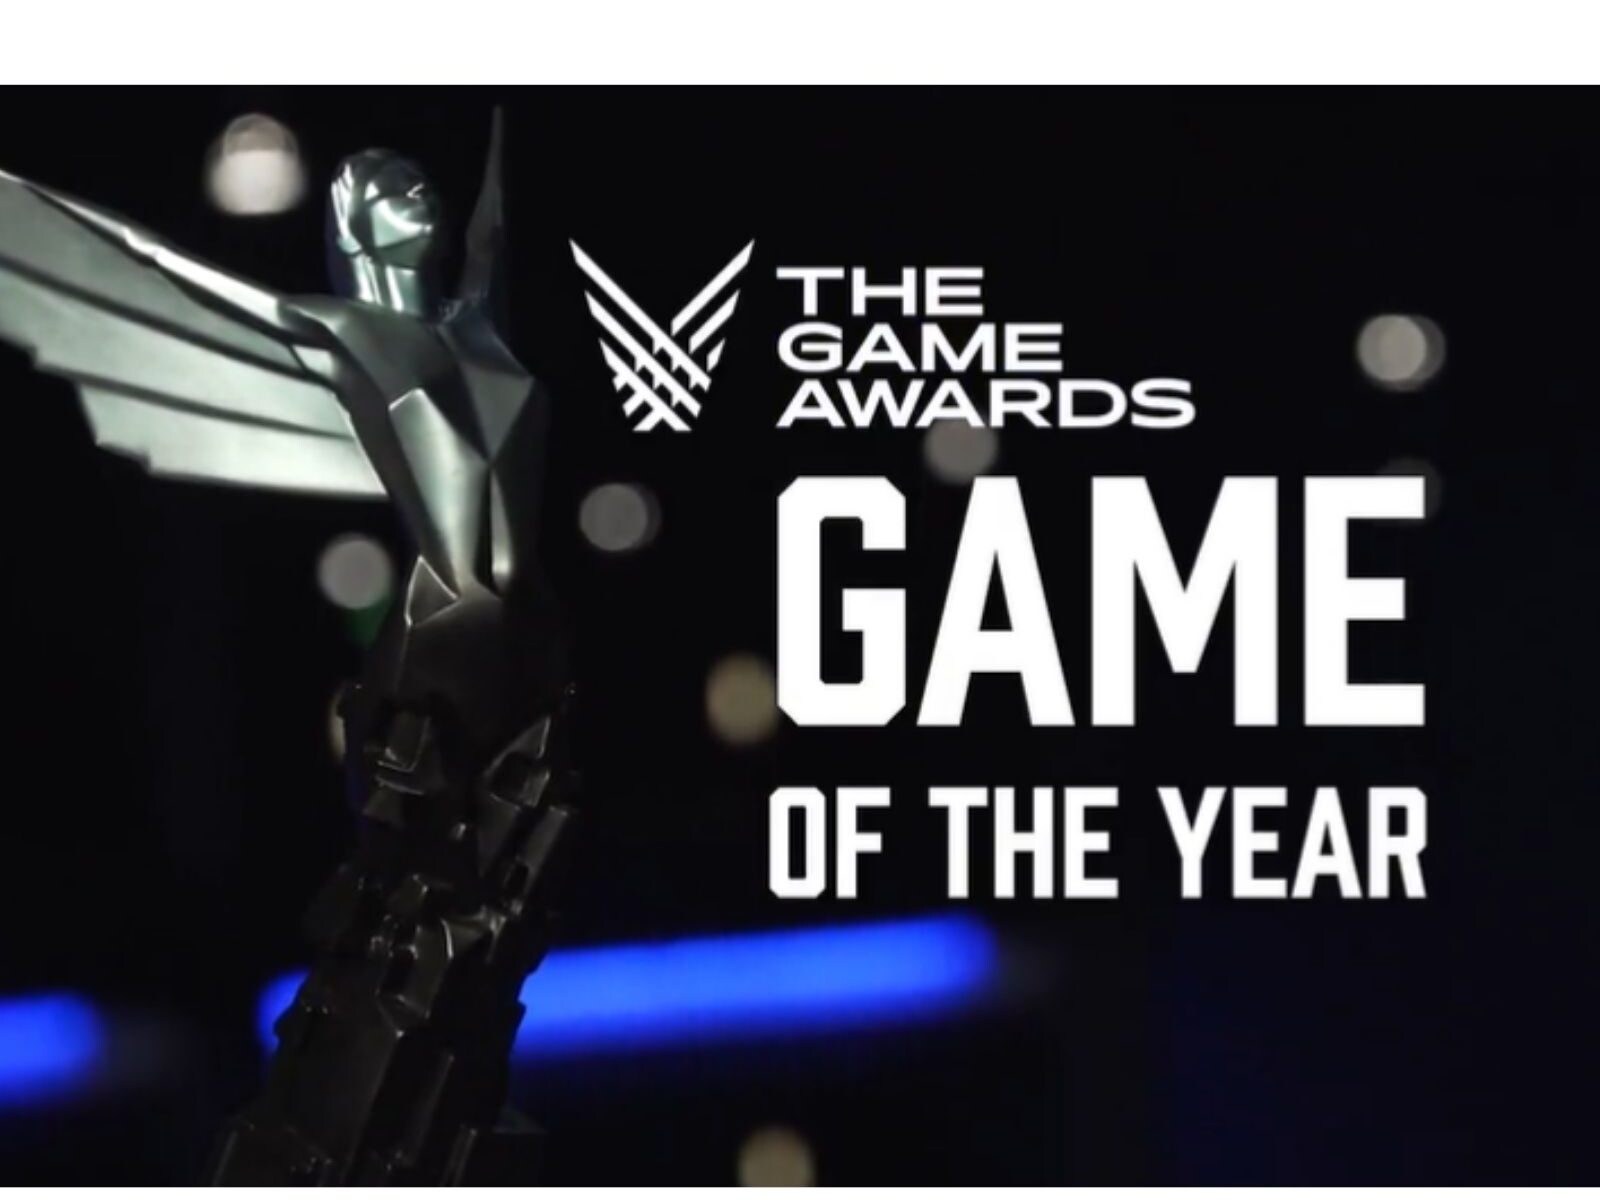 The Game Awards 2021 nominations revealed ahead of the December event